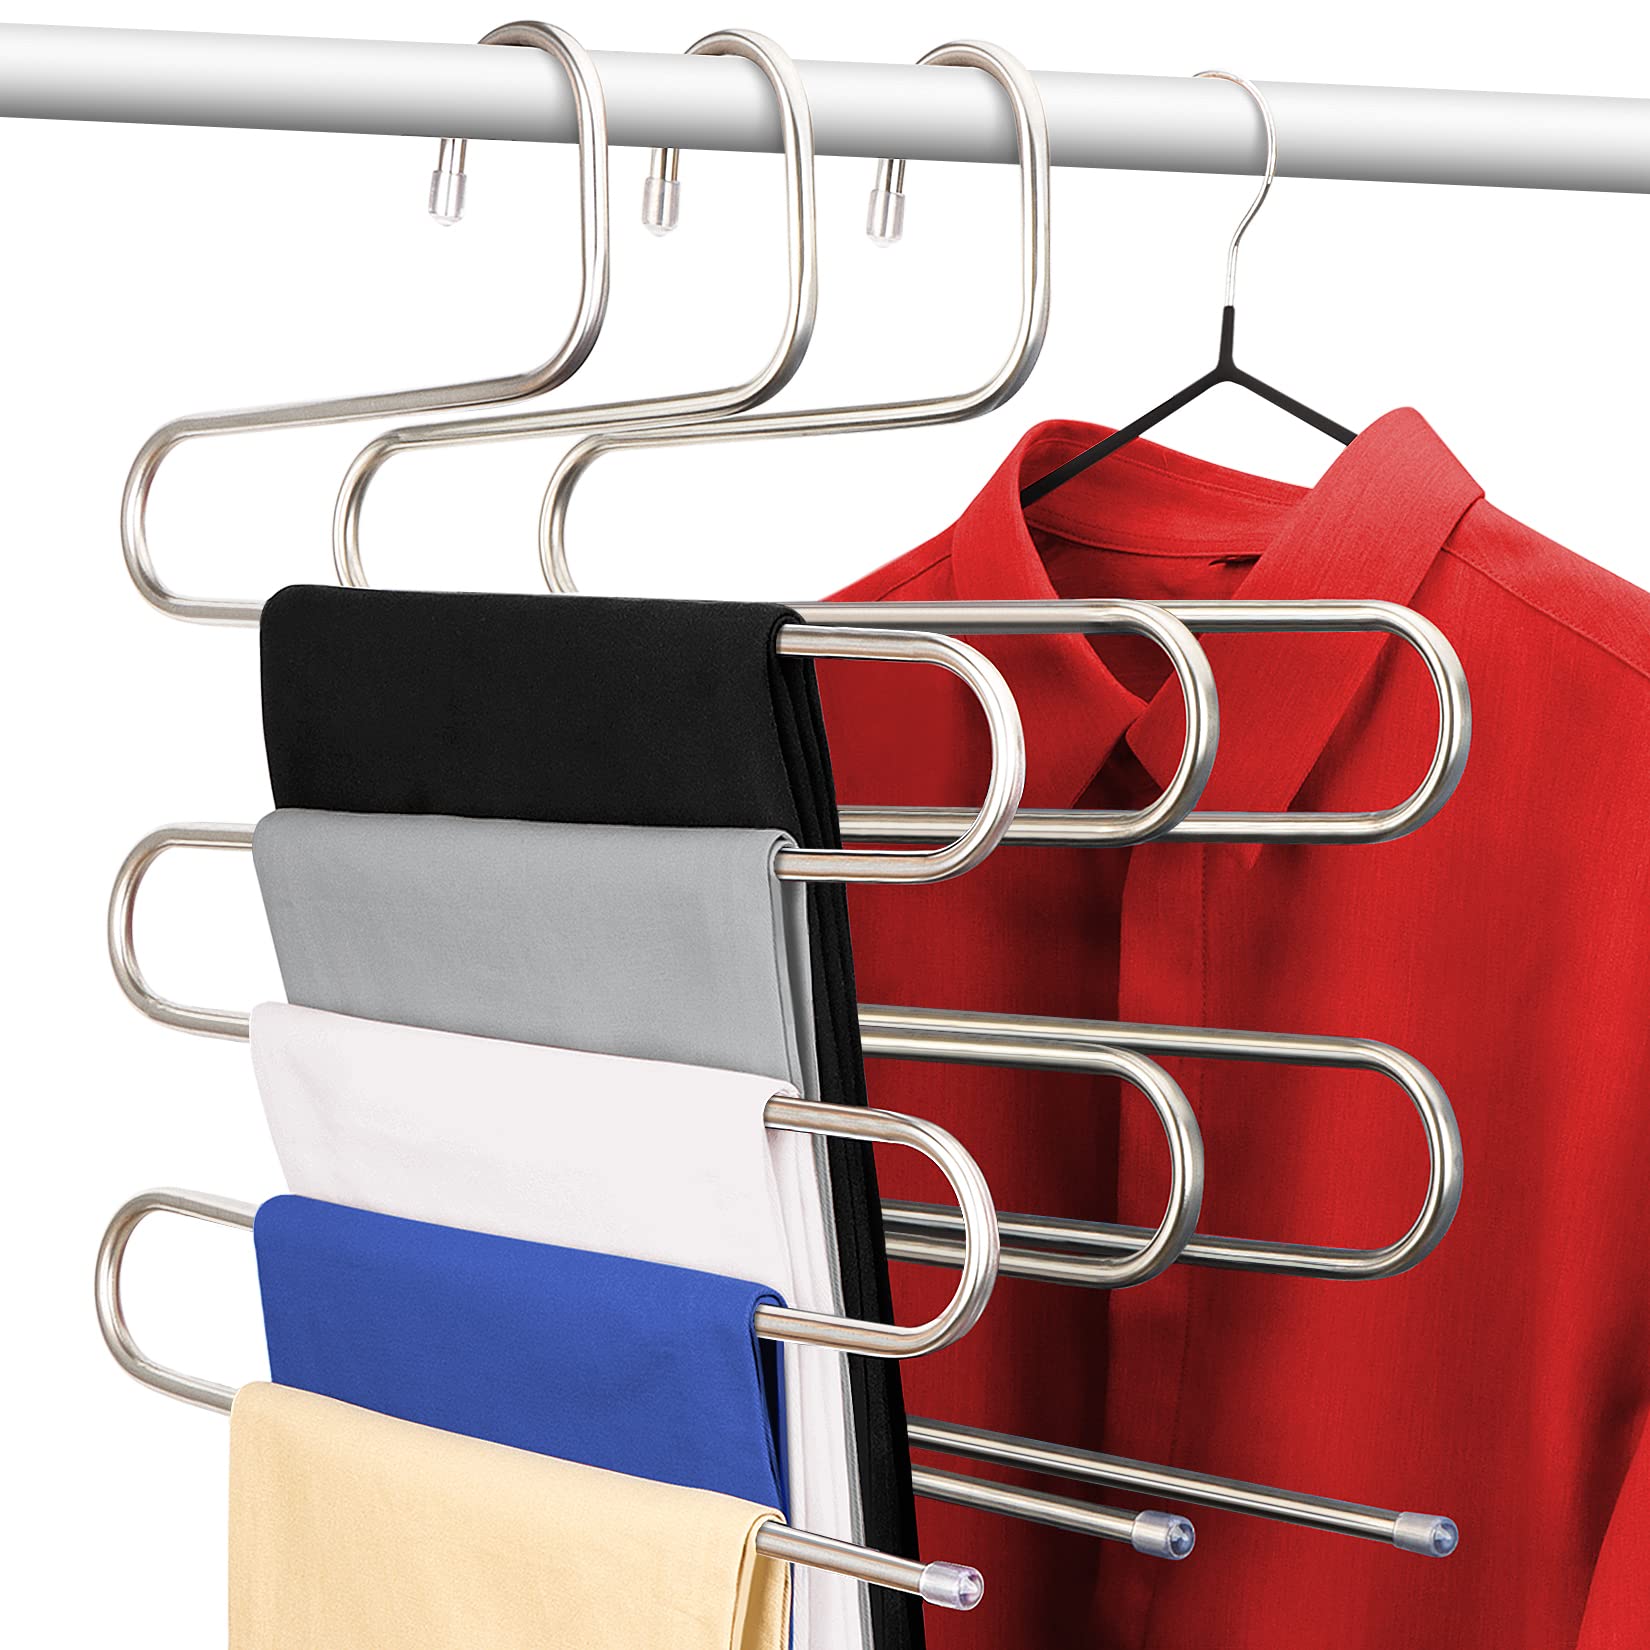 S-Shaped Hangers To Store More Clothes In One Spot - NextInGifts